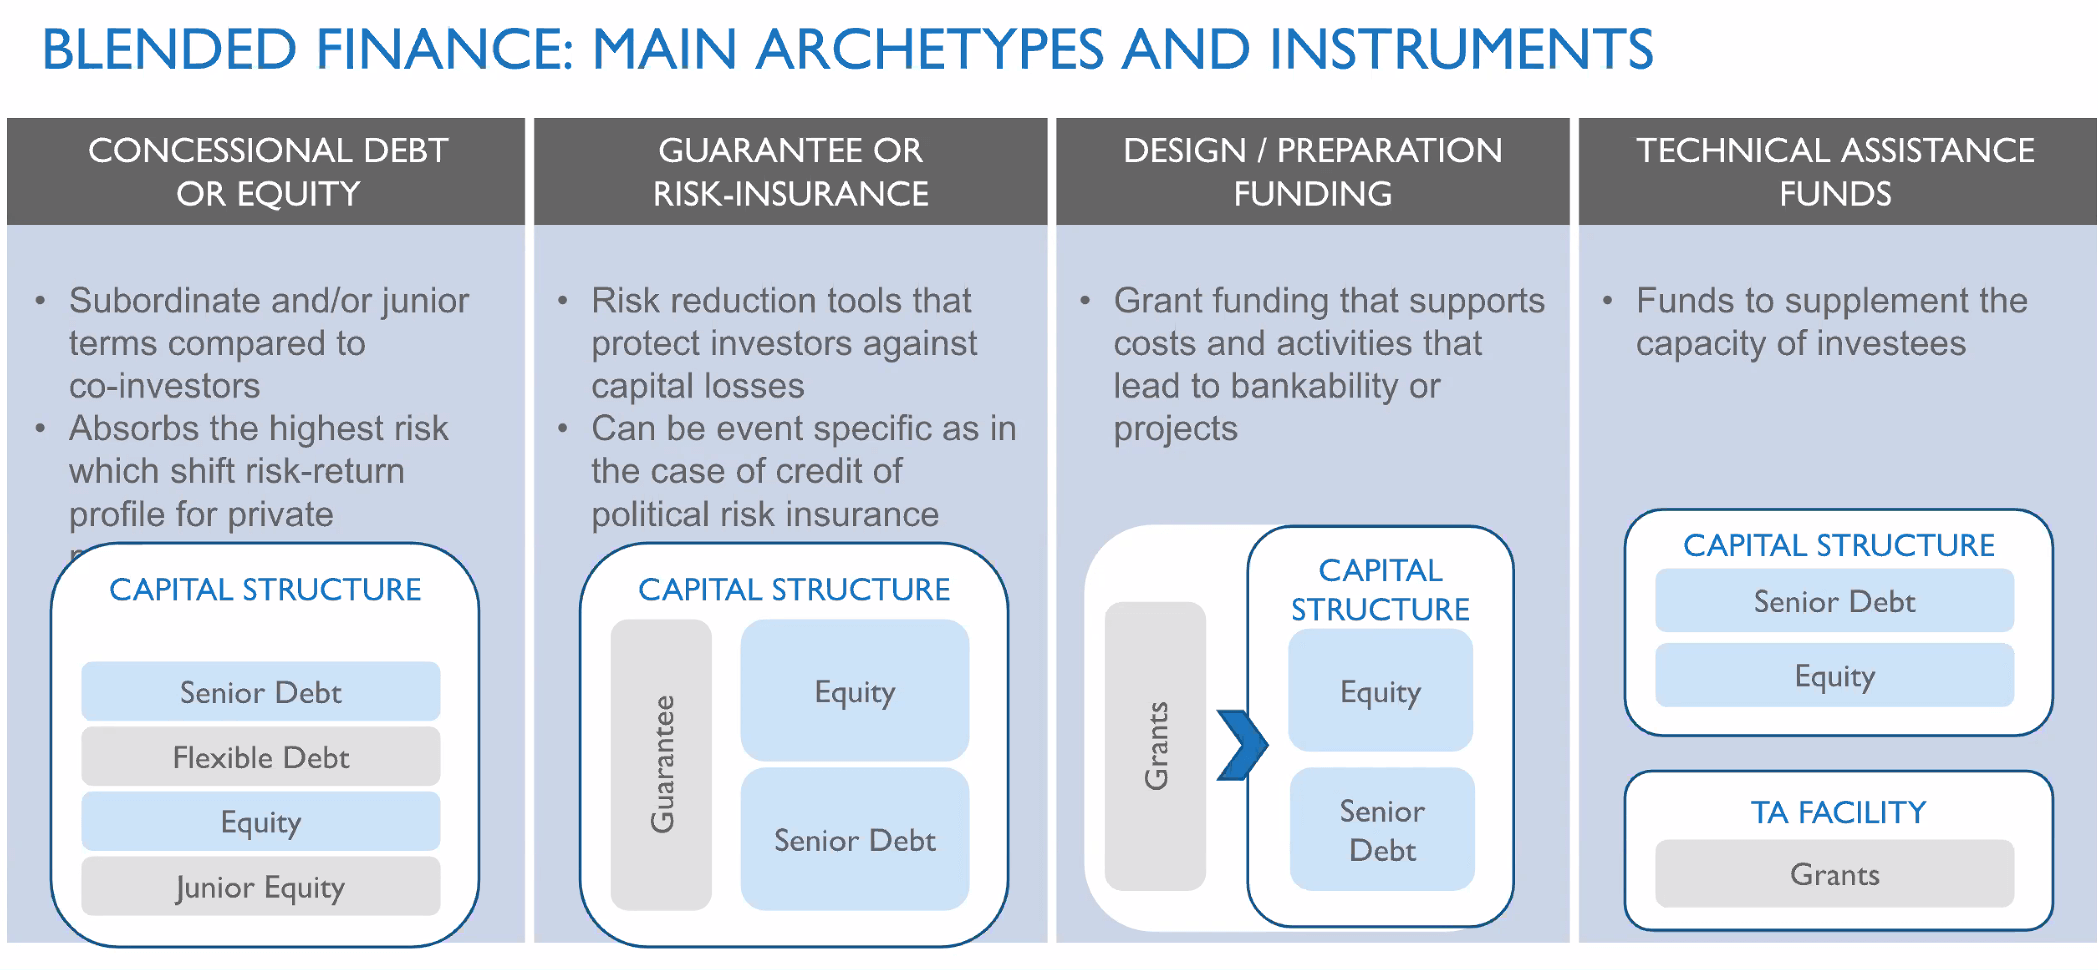 Blended Finance: Main Archtypes and Instruments